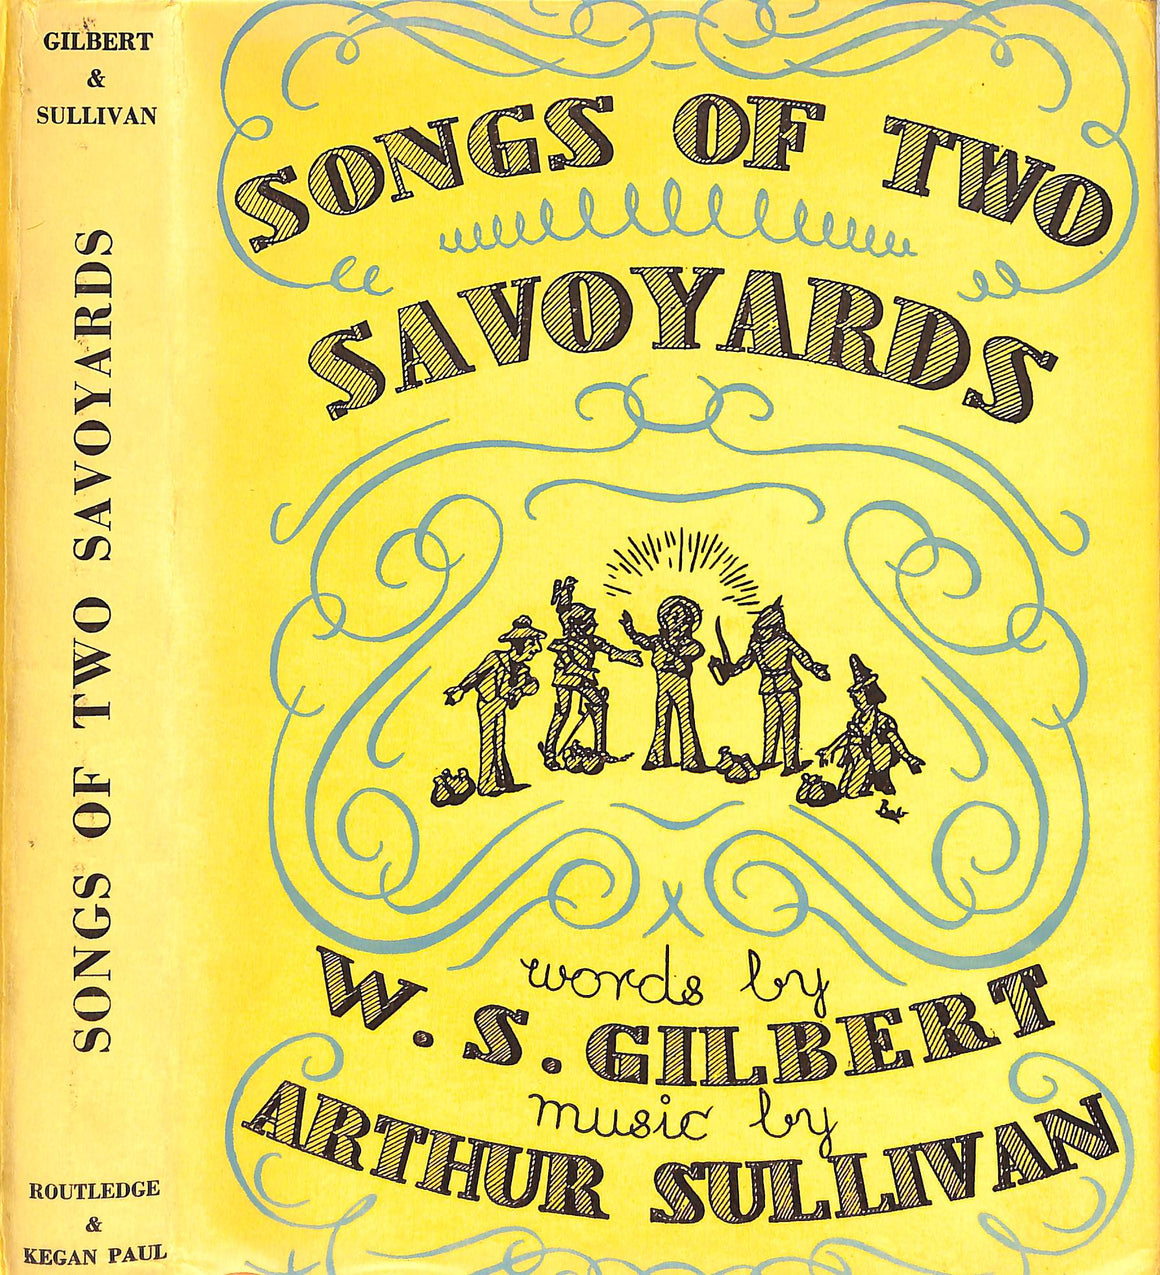 "Songs Of Two Savoyards" 1954 GILBERT, W. S. [words and illustrations by] & SULLIVAN, Arthur [music by]